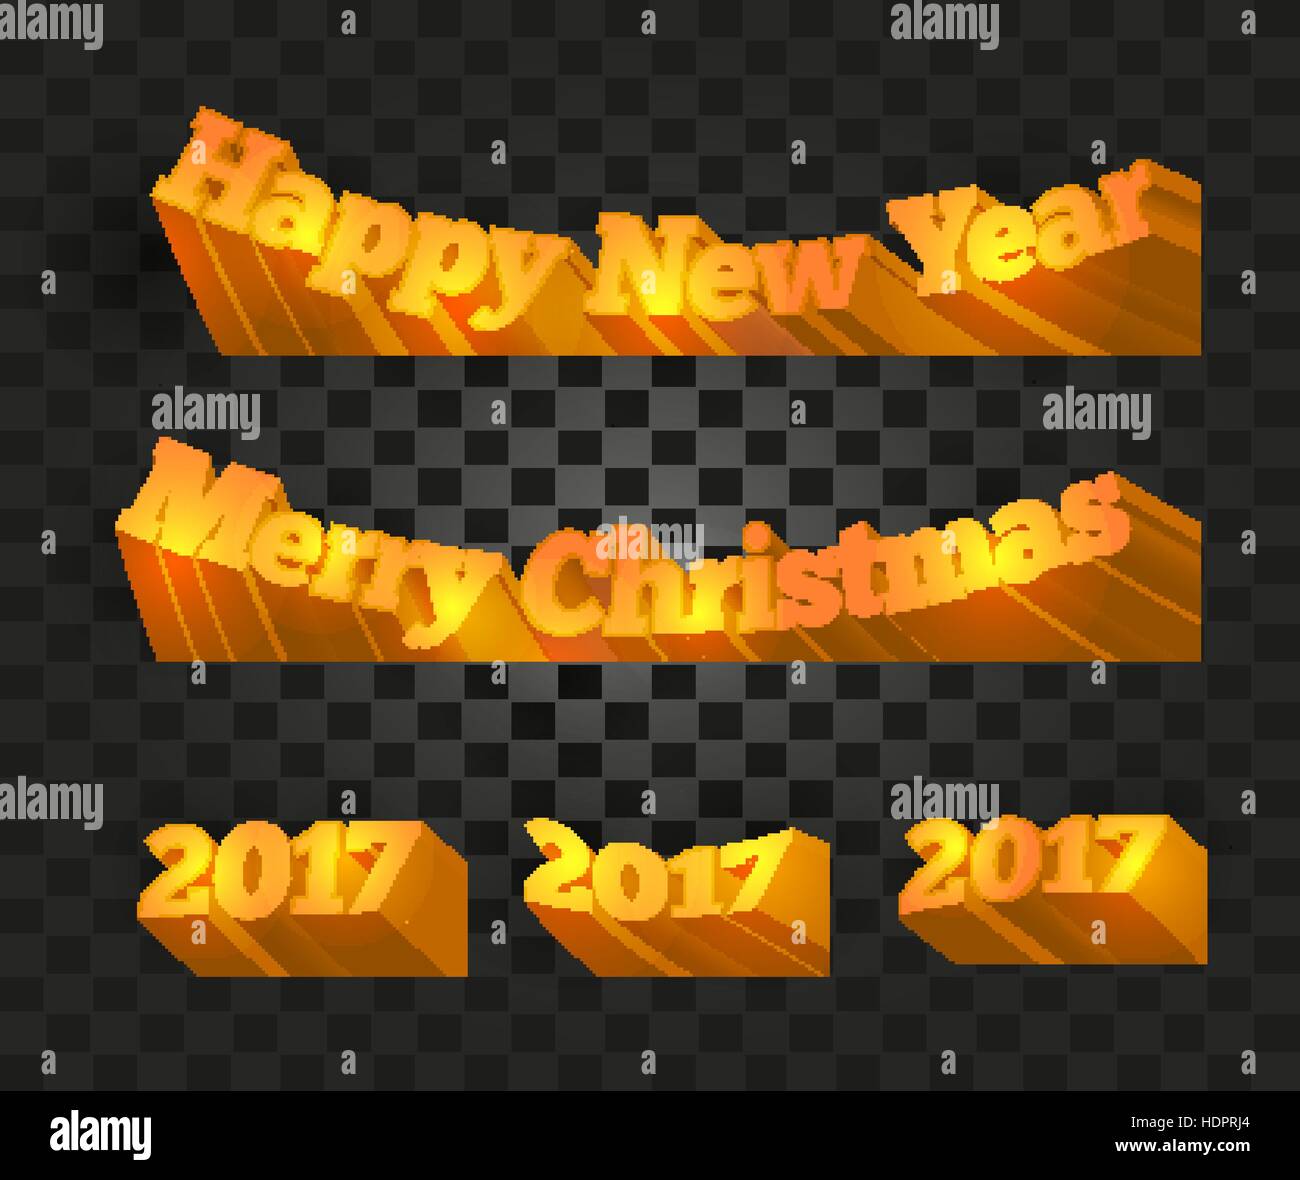 Merry christmas and happy new year 2017 writing on the checkered background. Festive wrapping paper with golden letters. Xmas greeting card backdrop. Vector illustration. Stock Vector